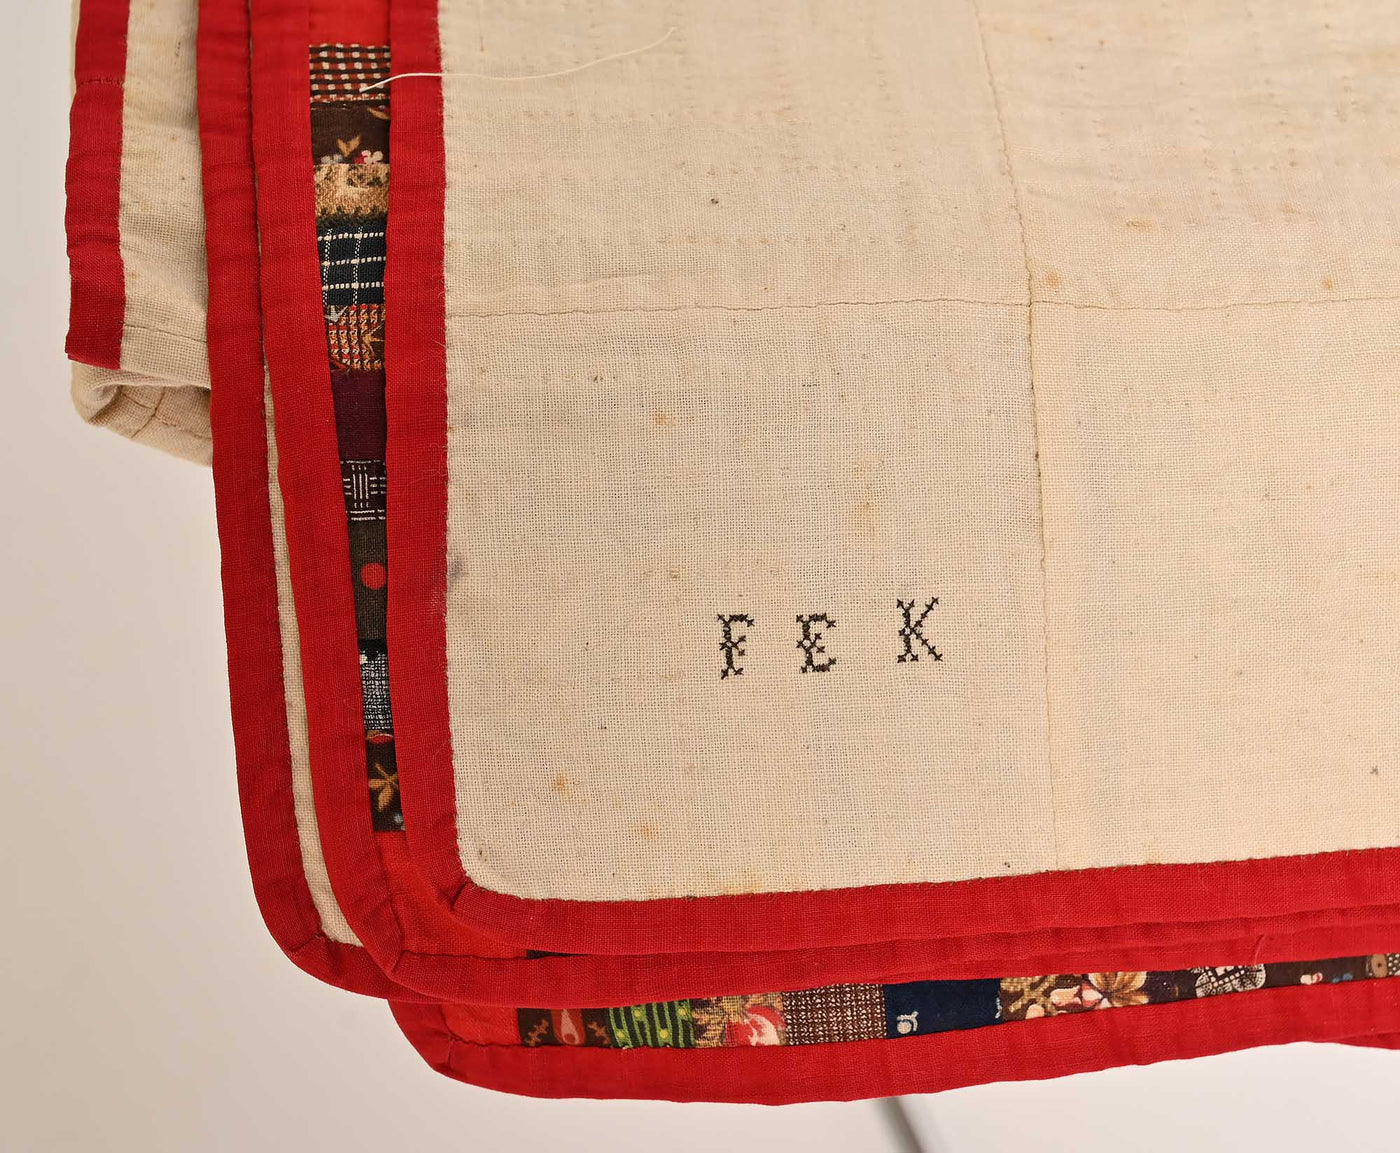 Backing of 19th century Barn-raising Log Cabin Quilt showing intials "F.E.K"